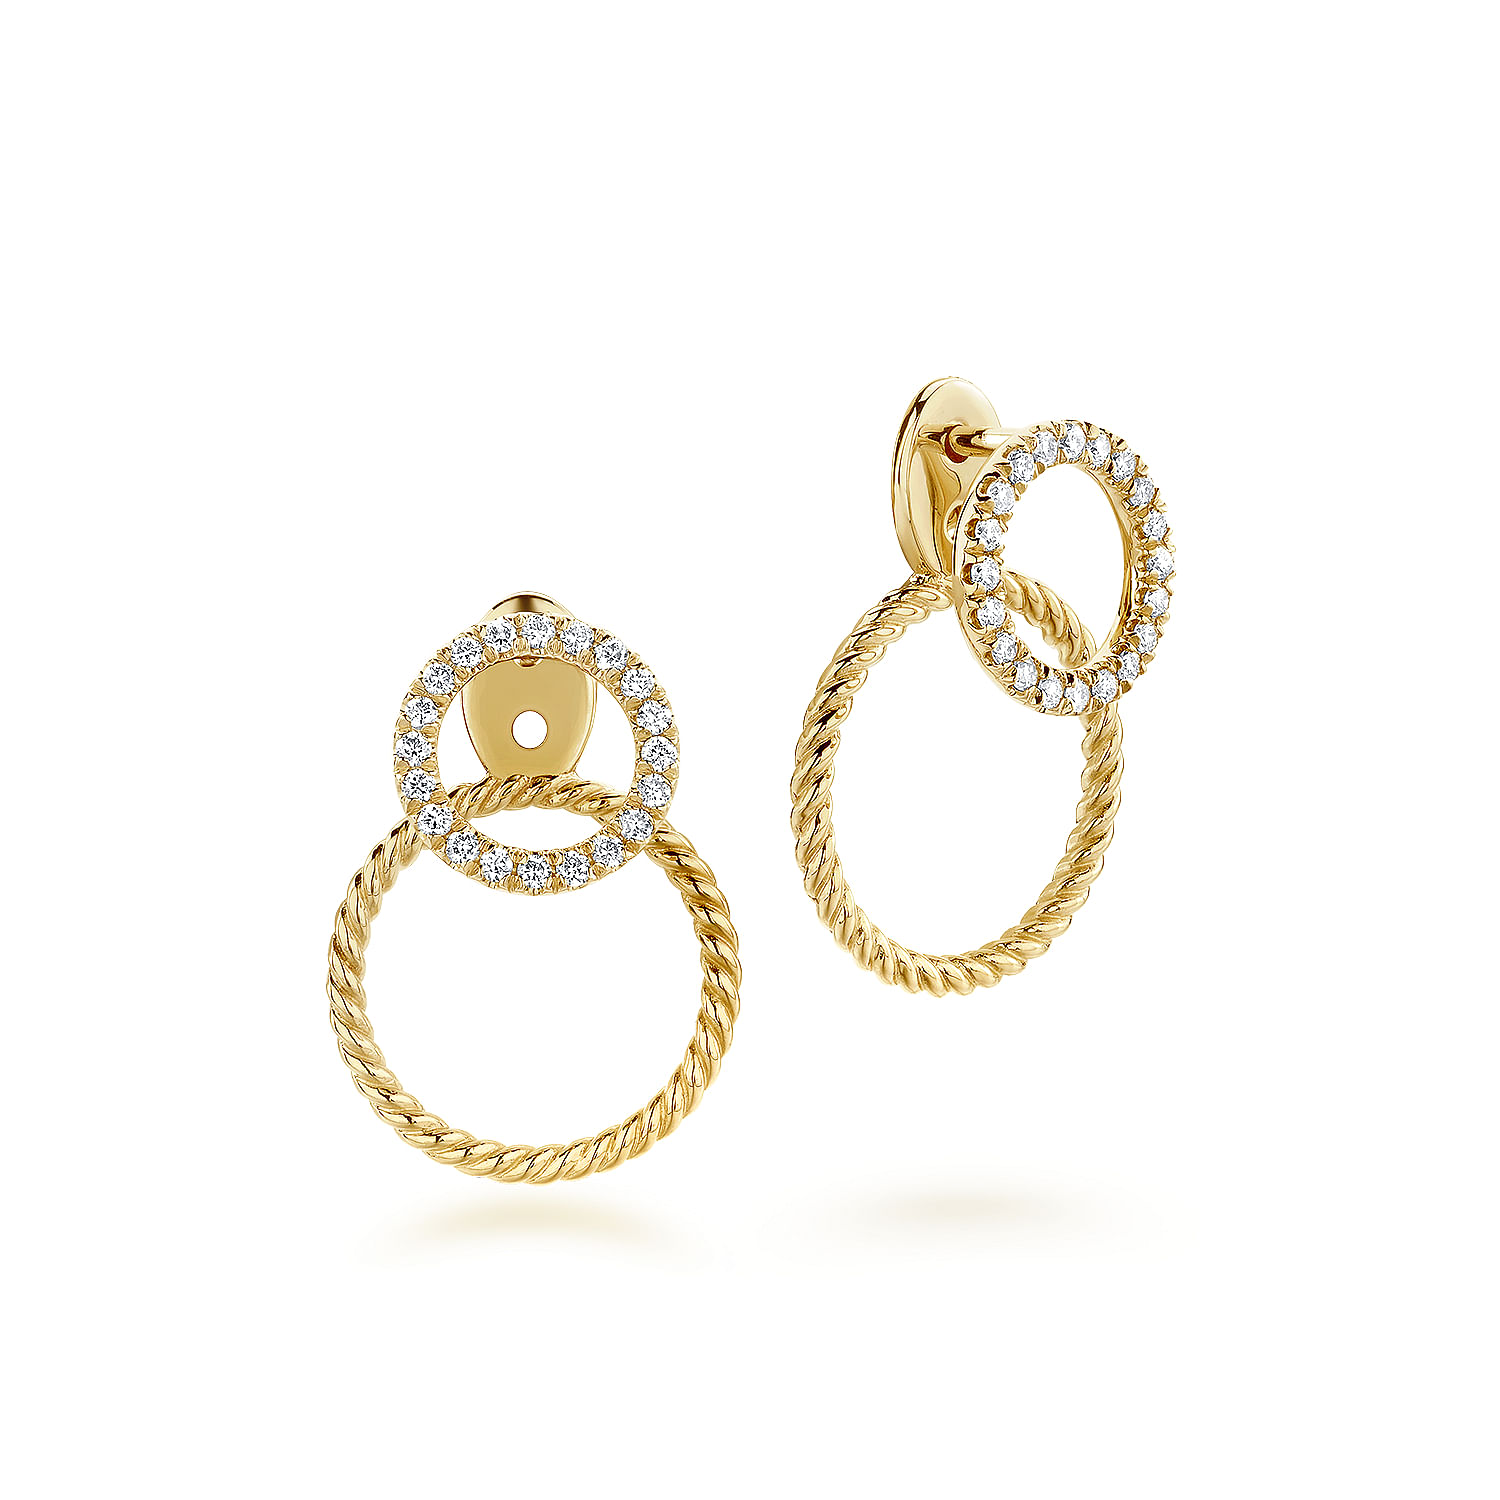 14K Yellow Gold Peek A Boo Double Circle Diamond and Twisted Rope Earrings